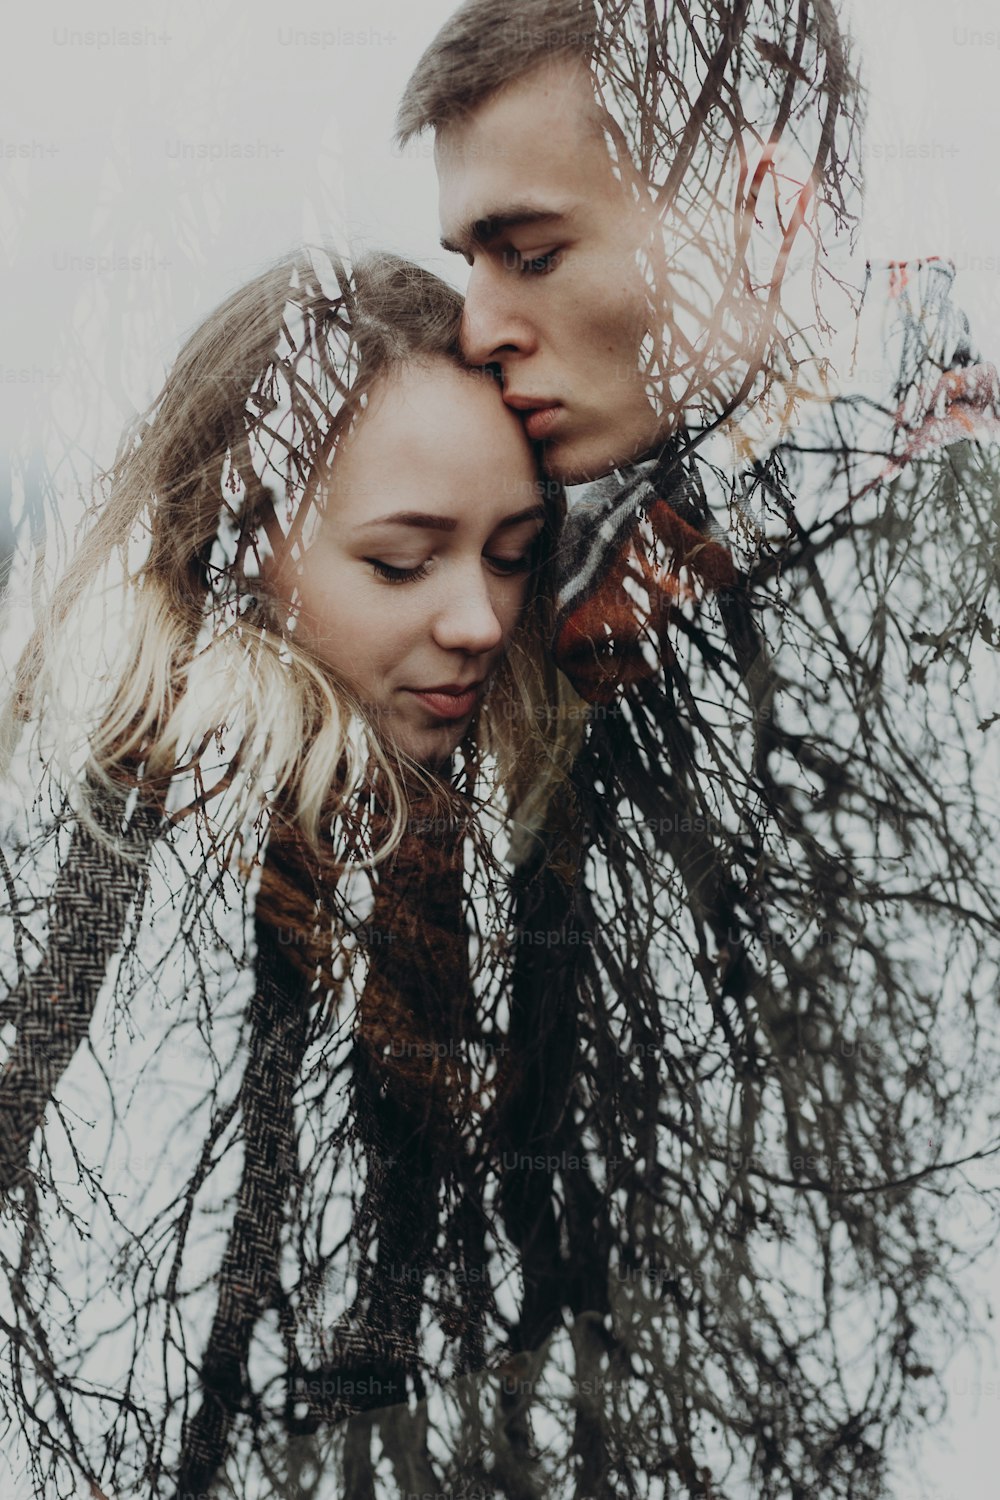 double exposure with couple and tree branches in autumn park. sensual atmospheric moment of stylish hipsters with space for text. man and woman embracing. creative unusual photo